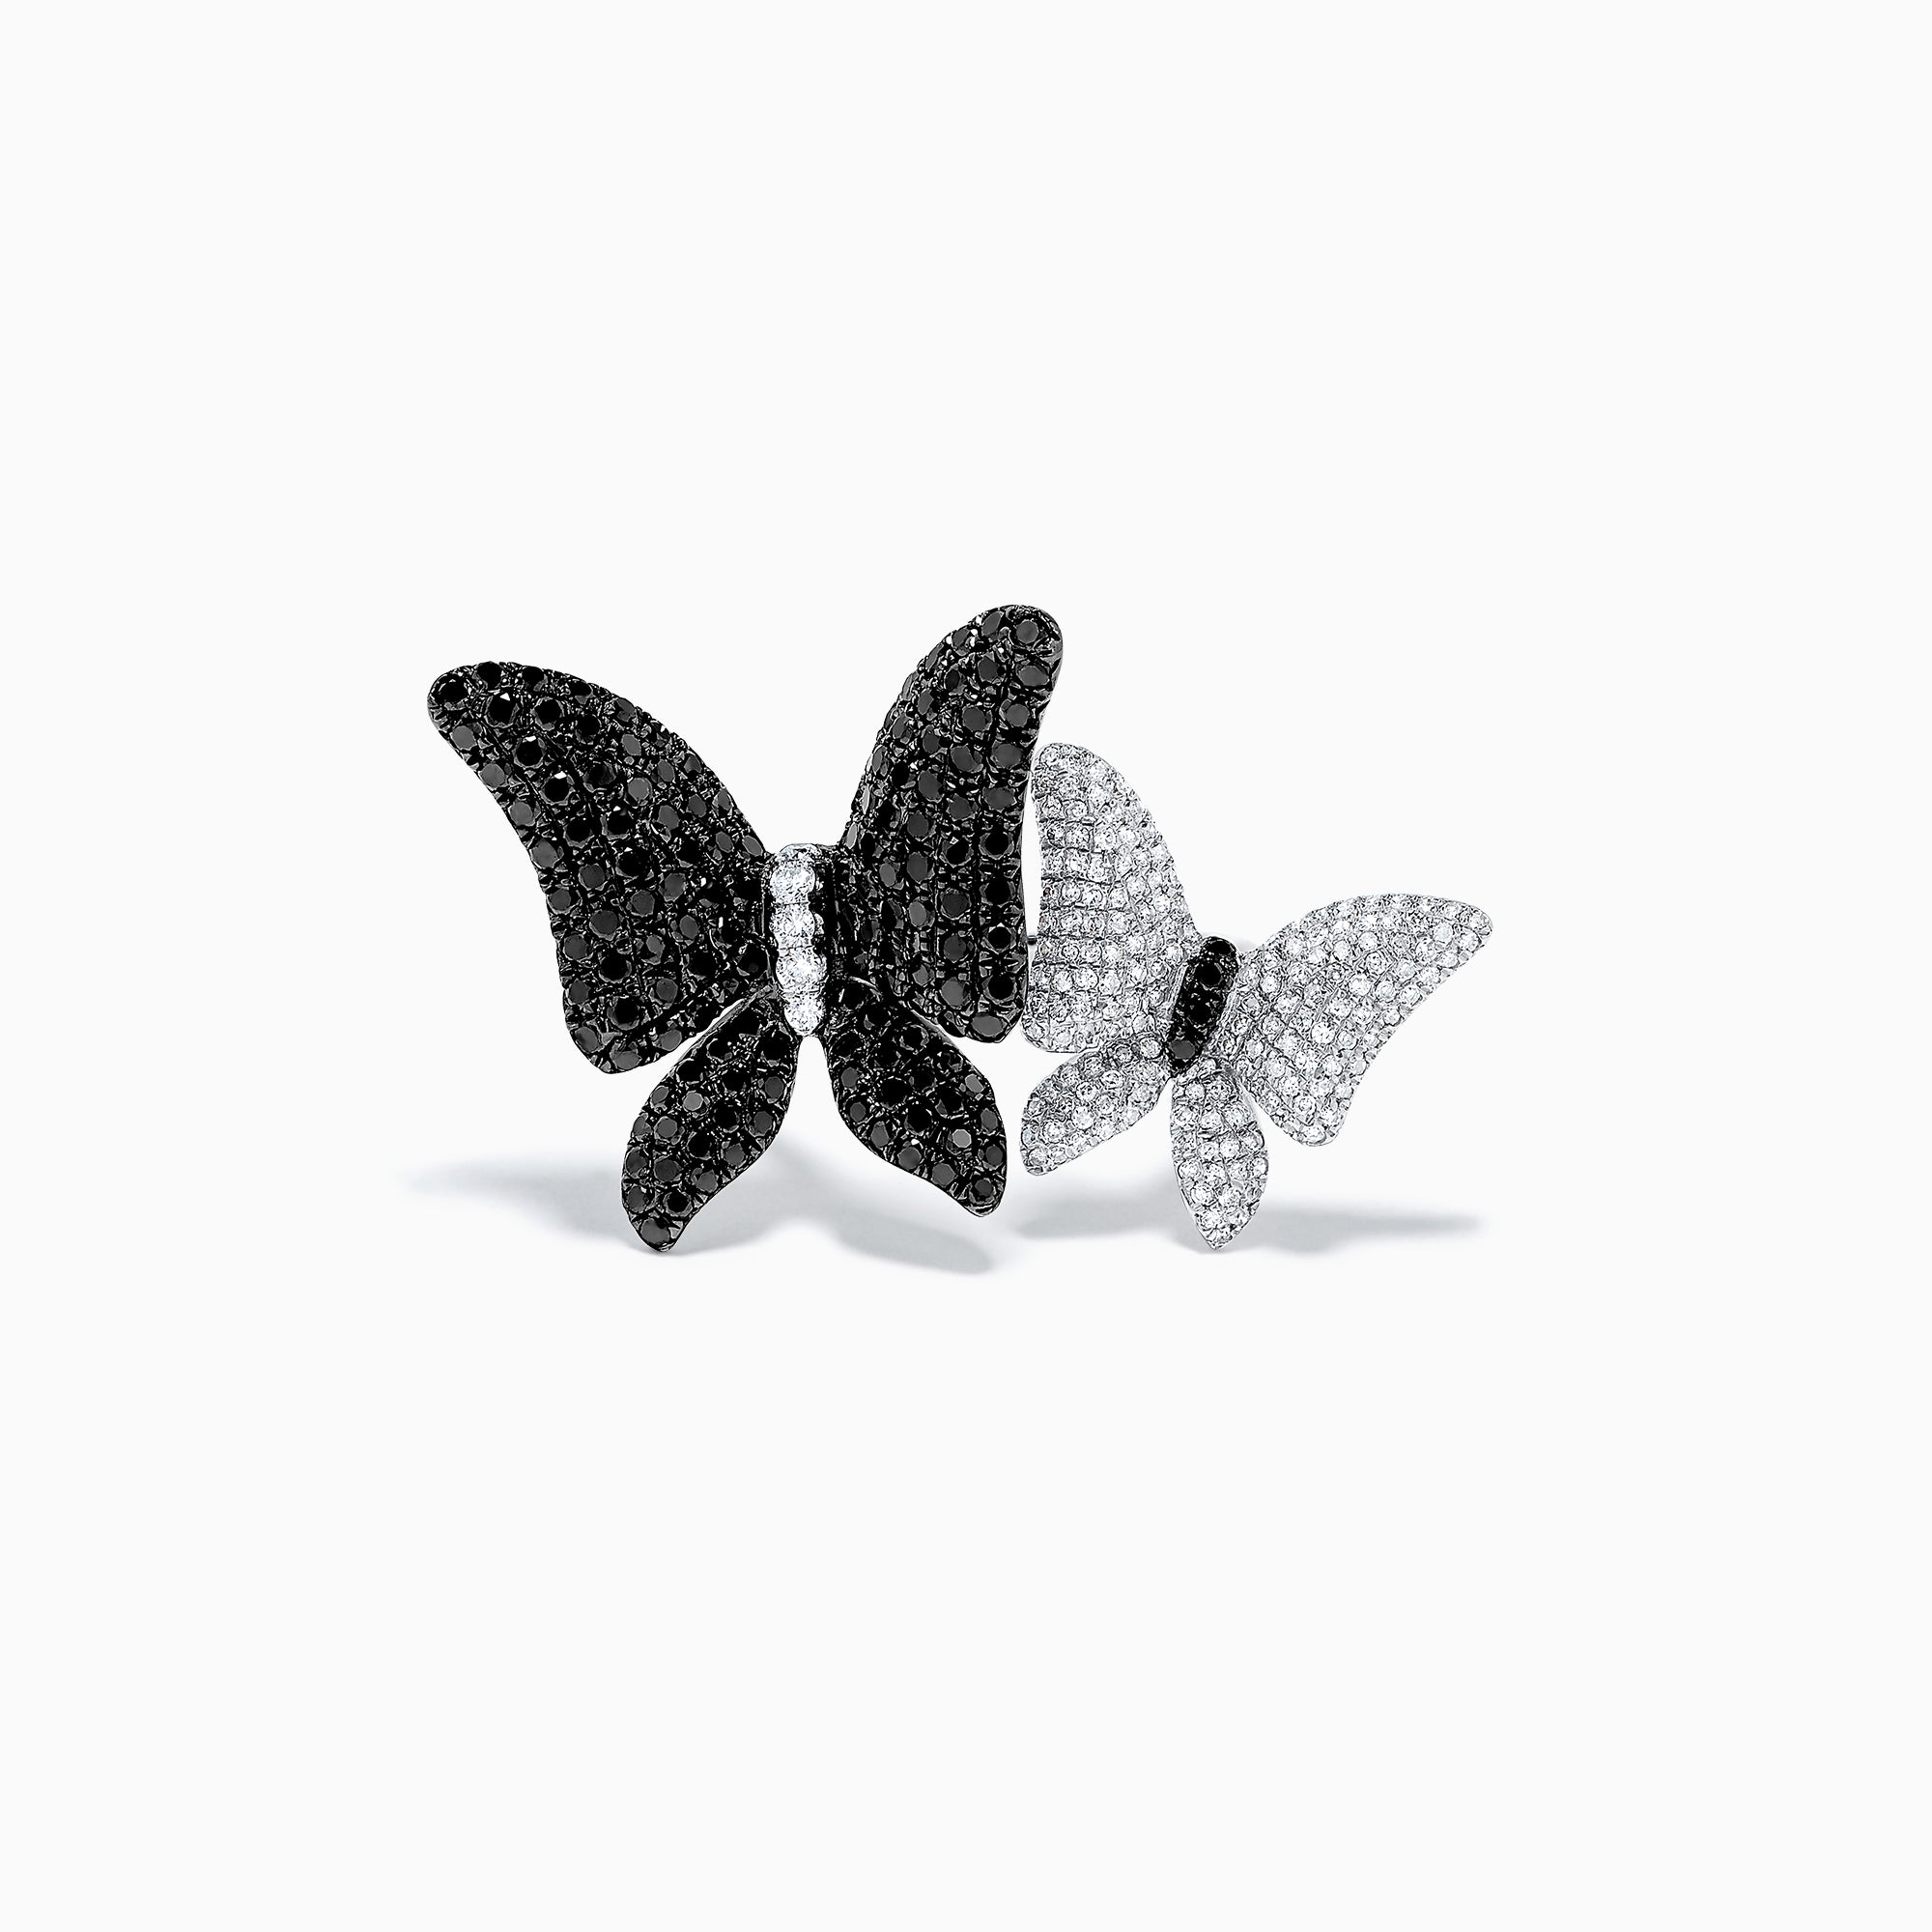 Effy Nature 14K White Gold Black and White Diamond Butterfly Ring, 2.23 TCW